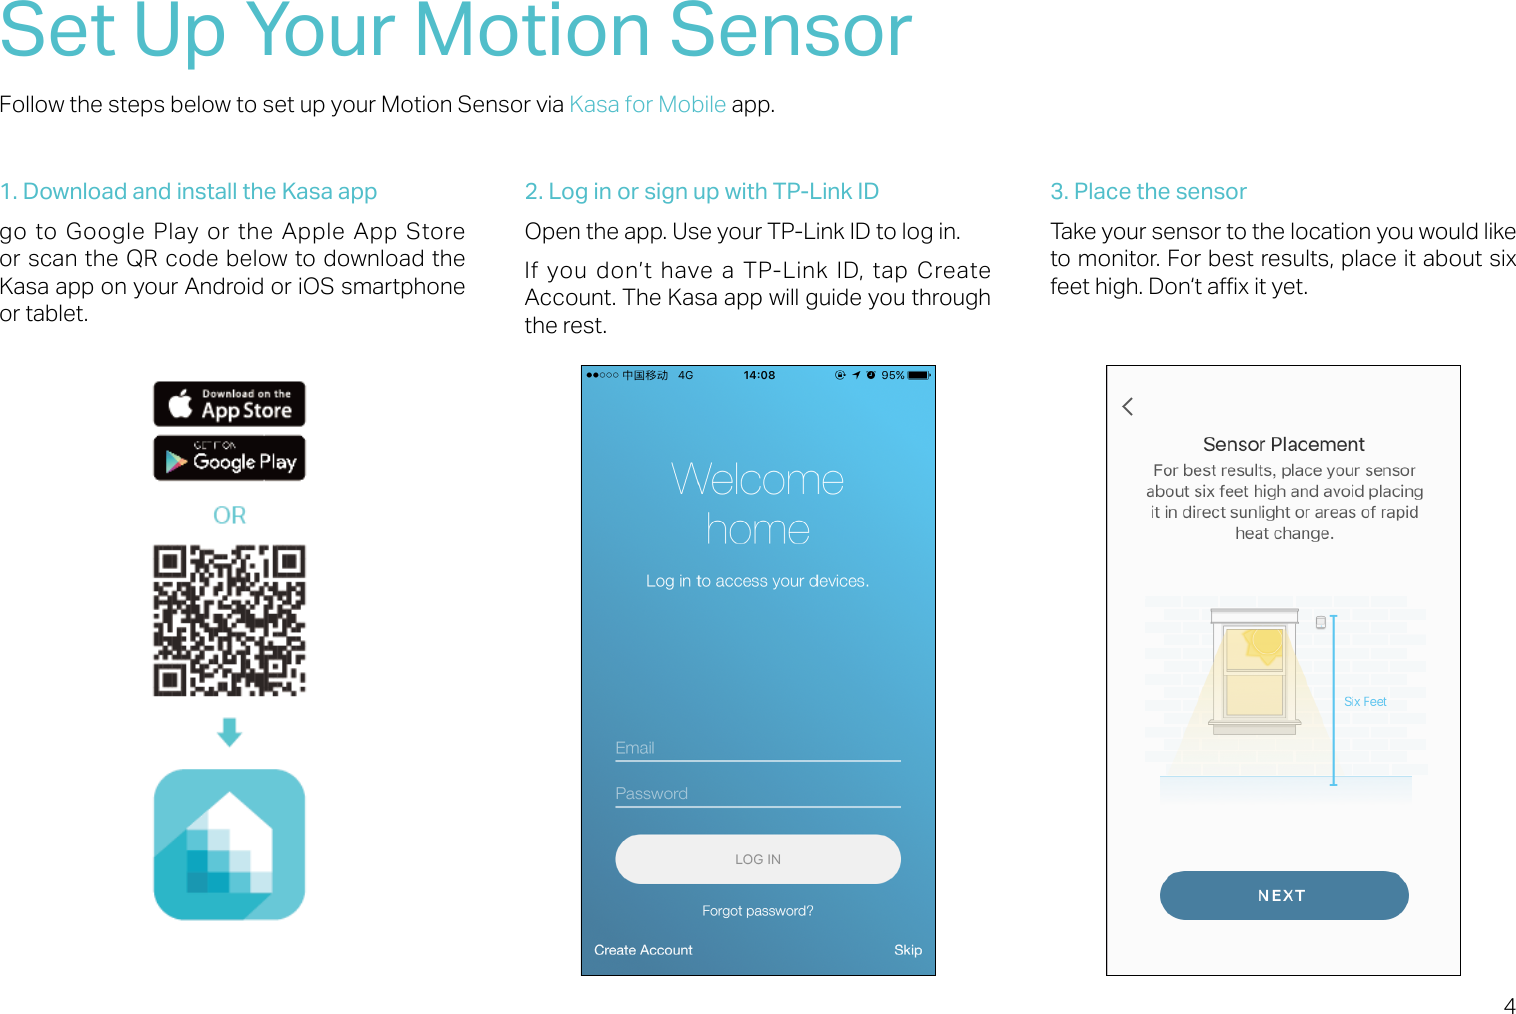 4Set Up Your Motion SensorFollow the steps below to set up your Motion Sensor via Kasa for Mobile app.1. Download and install the Kasa appgo to Google Play or the Apple App Store or scan the QR code below to download the Kasa app on your Android or iOS smartphone or tablet.2. Log in or sign up with TP-Link IDOpen the app. Use your TP-Link ID to log in. If  you don’t  have a TP-Link ID,  tap  Create Account. The Kasa app will guide you through the rest.3. Place the sensorTake your sensor to the location you would like to monitor. For best results, place it about six feet high. Don‘t ax it yet.